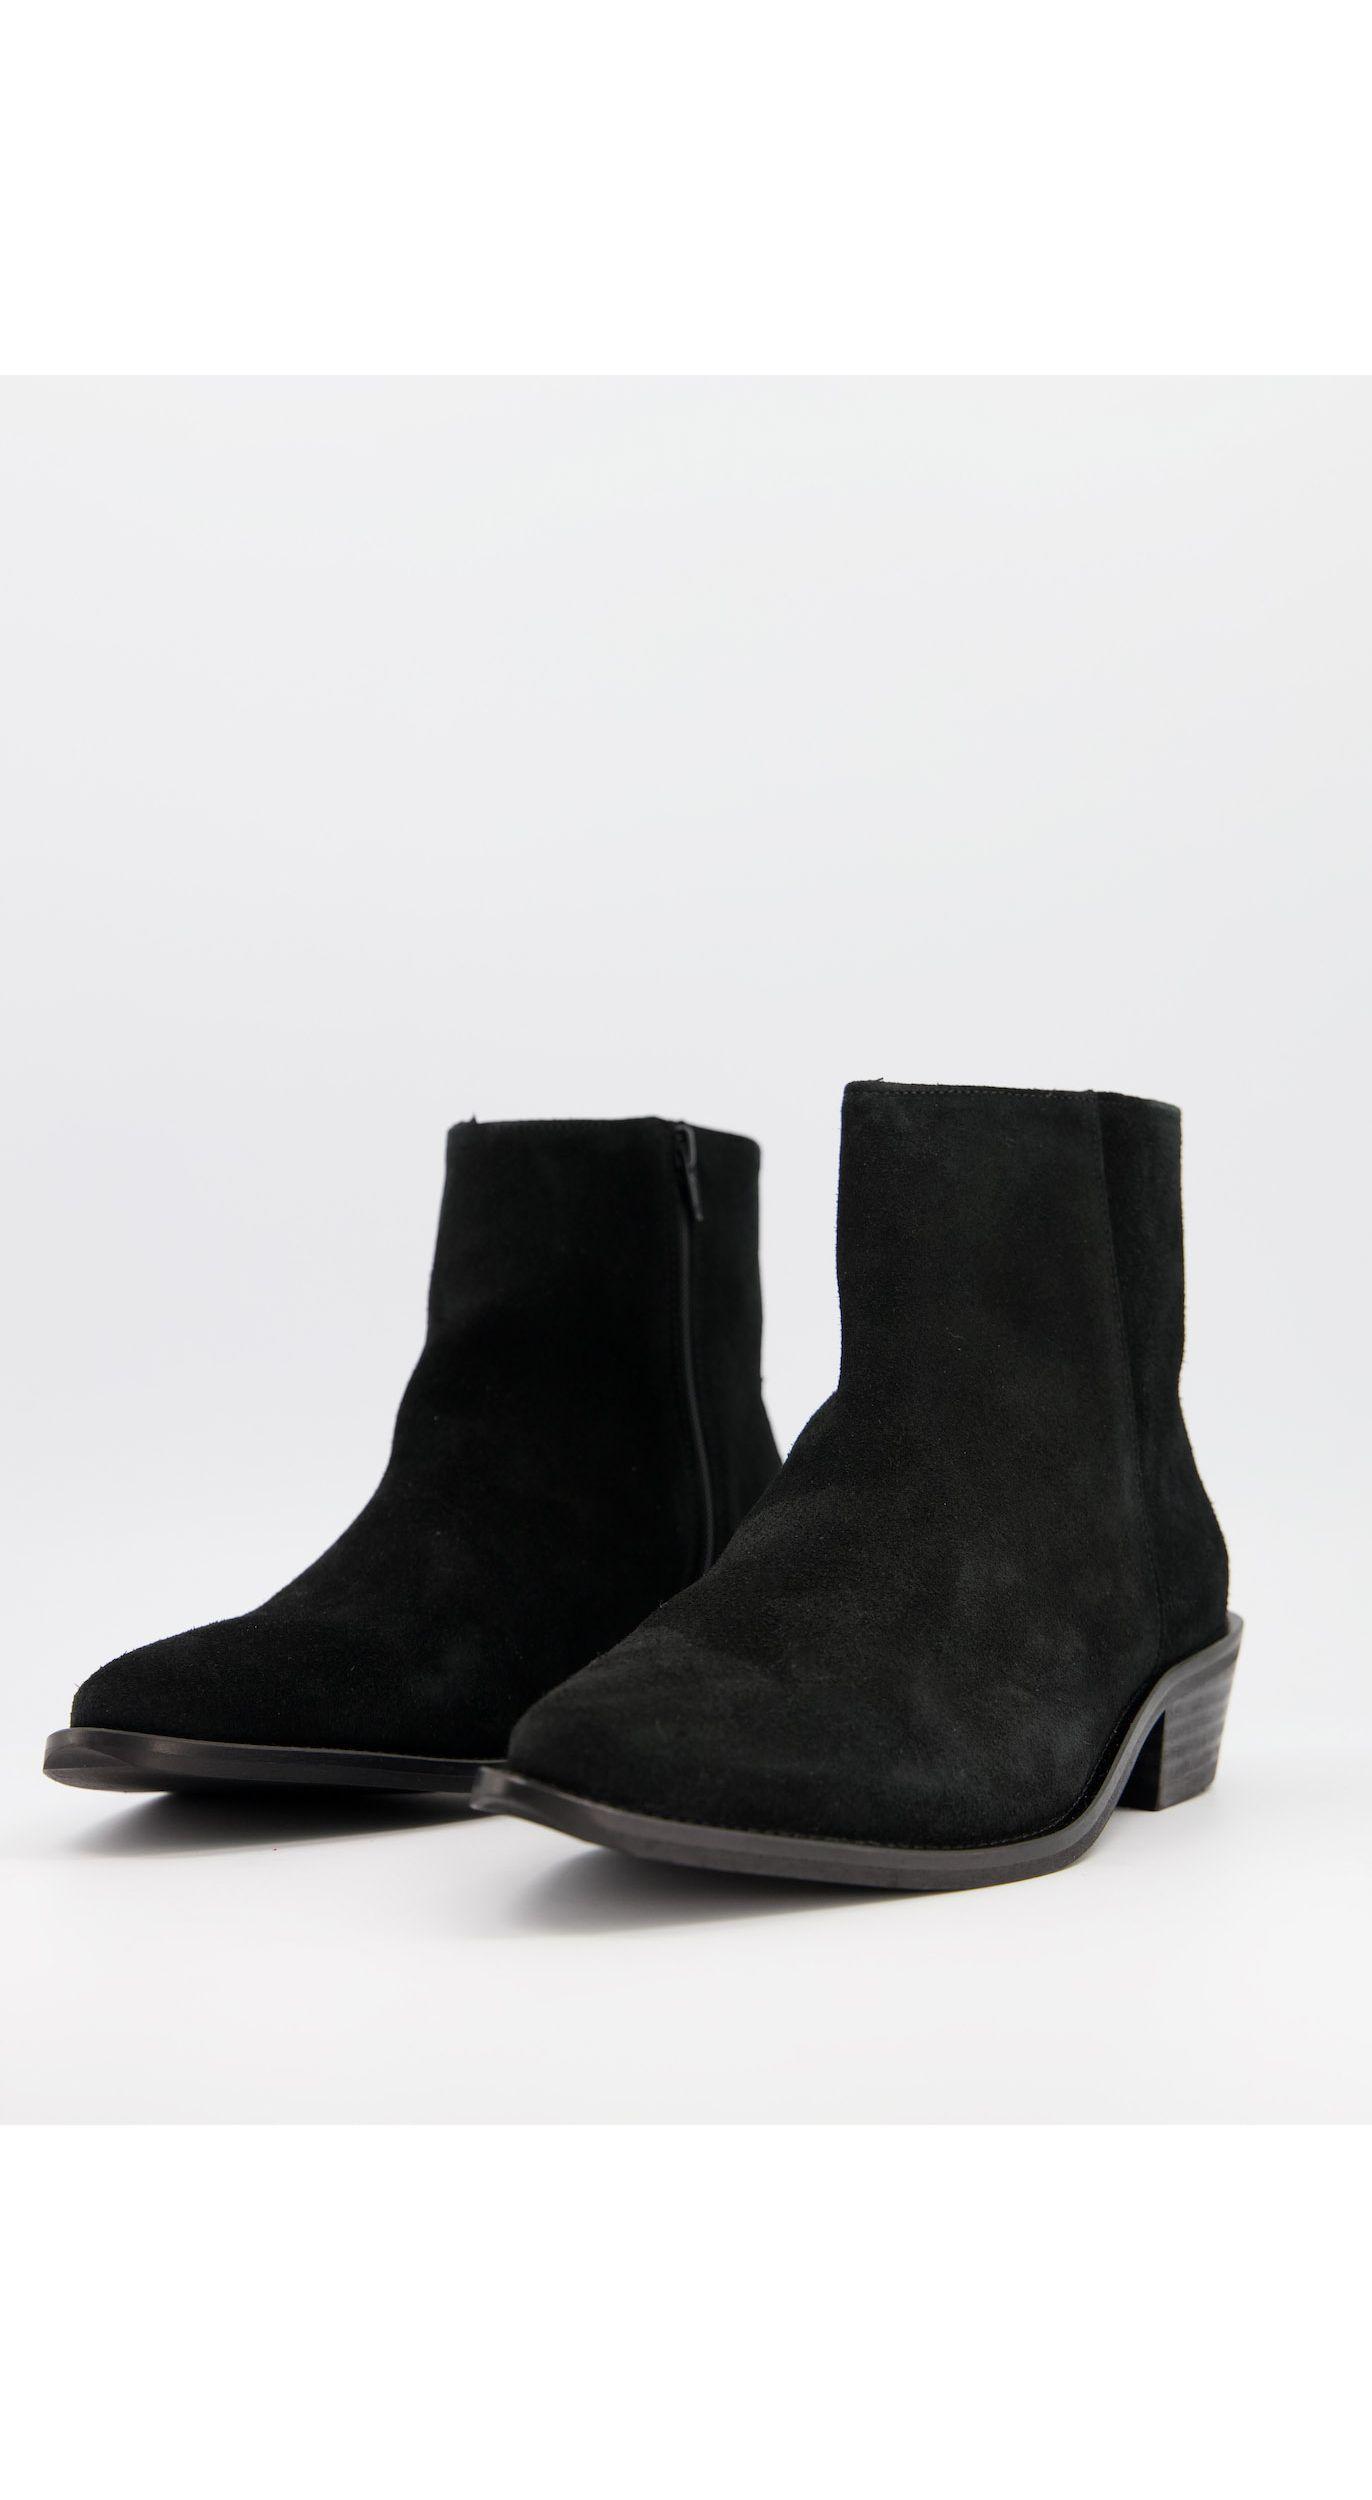 SELECTED Suede Chelsea Boot With Cuban Heel in Black for Men - Lyst